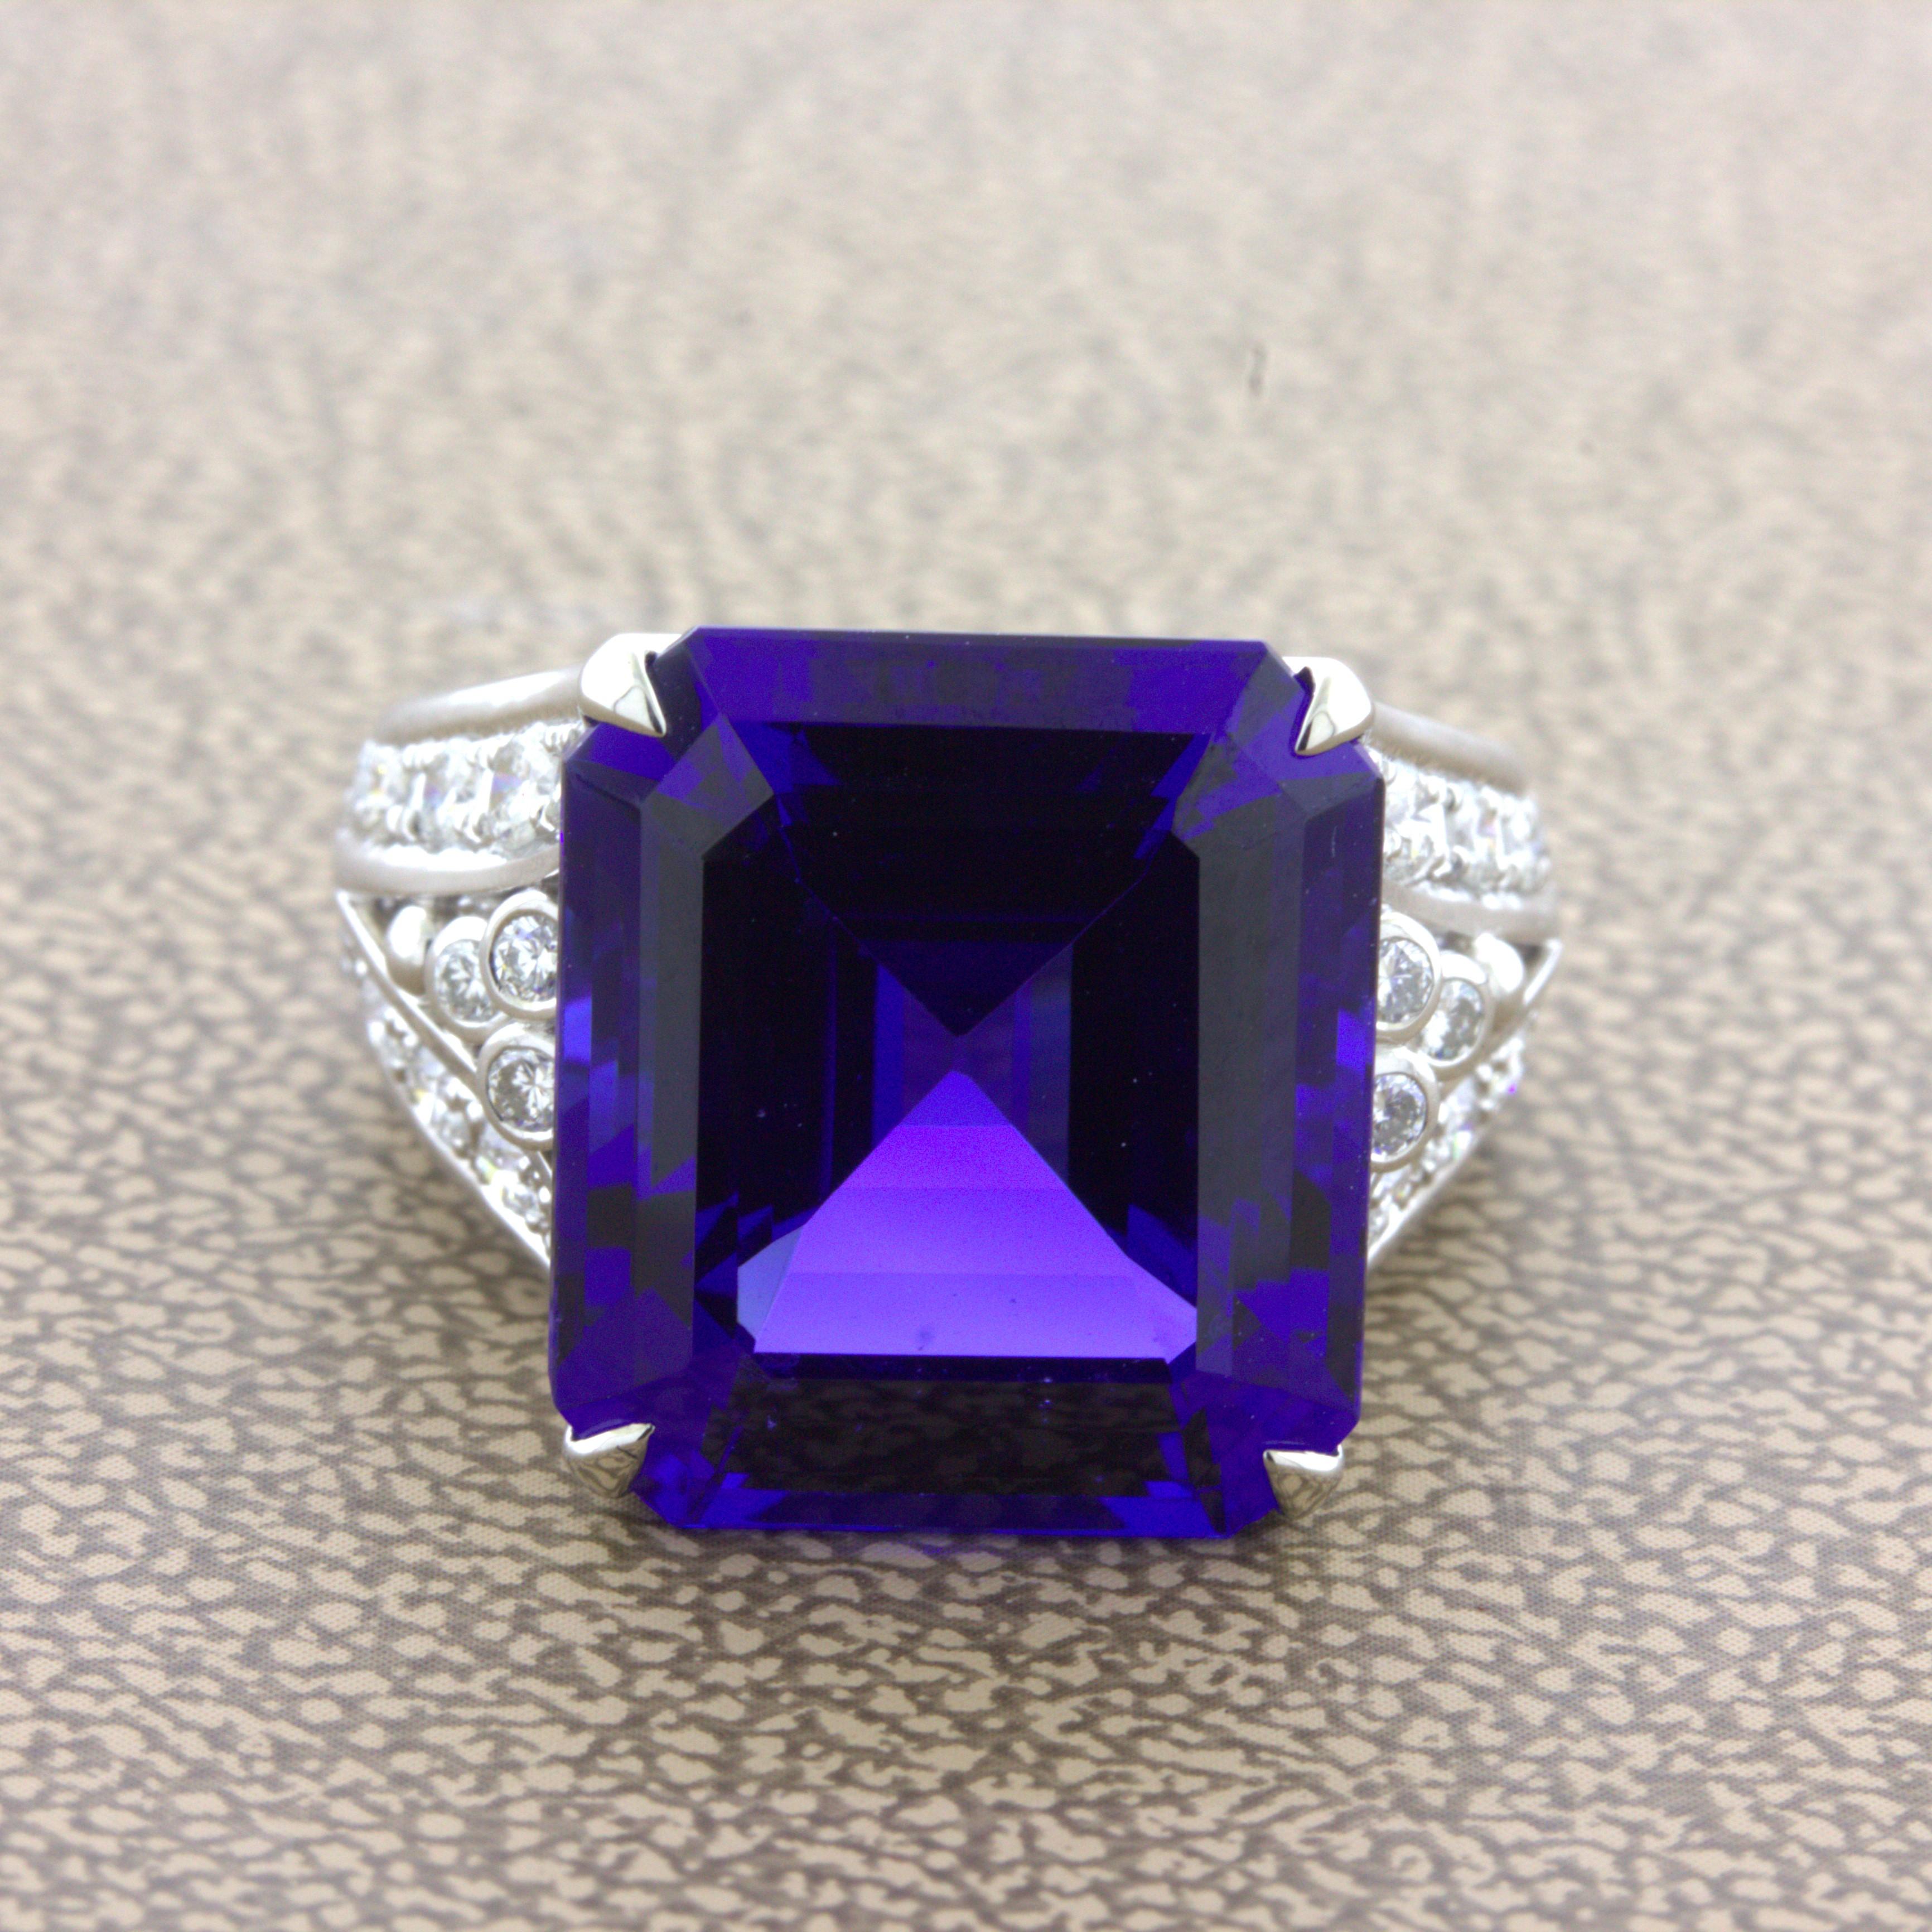 Wow. A superb top gem quality tanzanite weighing an impressive 13.66 carats takes center stage. It has a super rich and vivid purple blue color that flashes and radiates as the stone moves. Adding to that, it has a sleek square emerald-cut shape